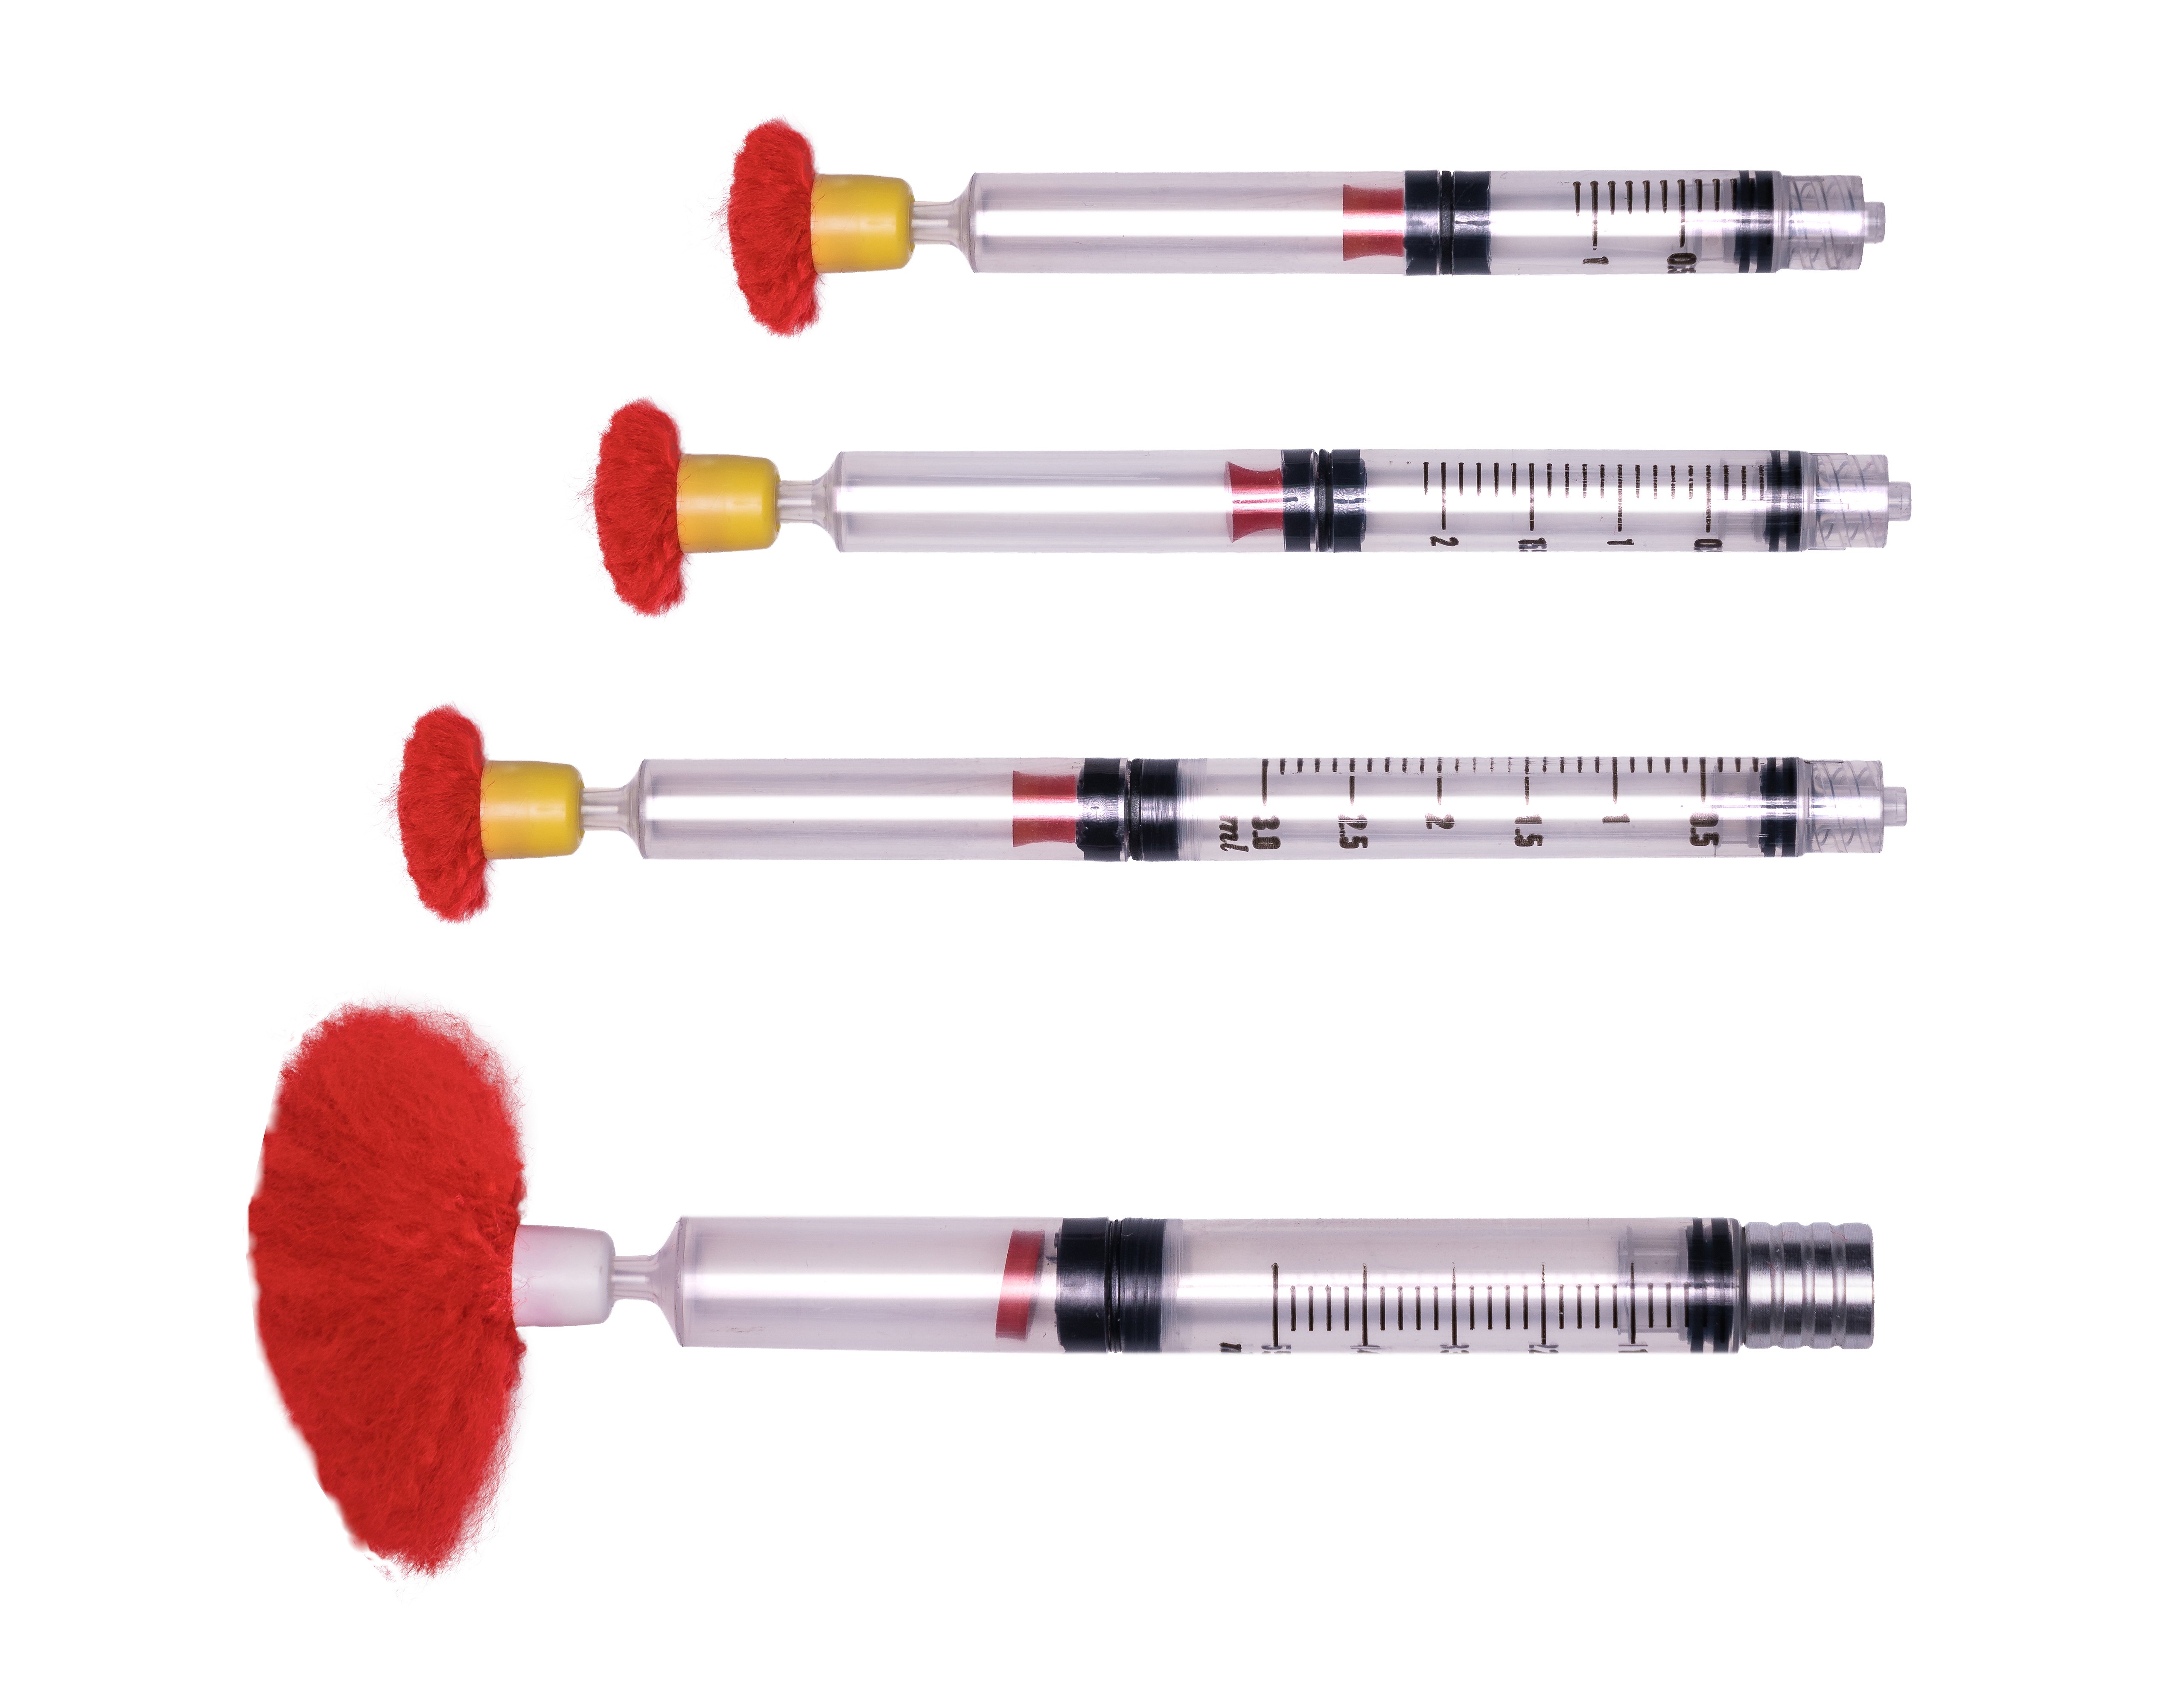 Dart-syringes for blowpipes